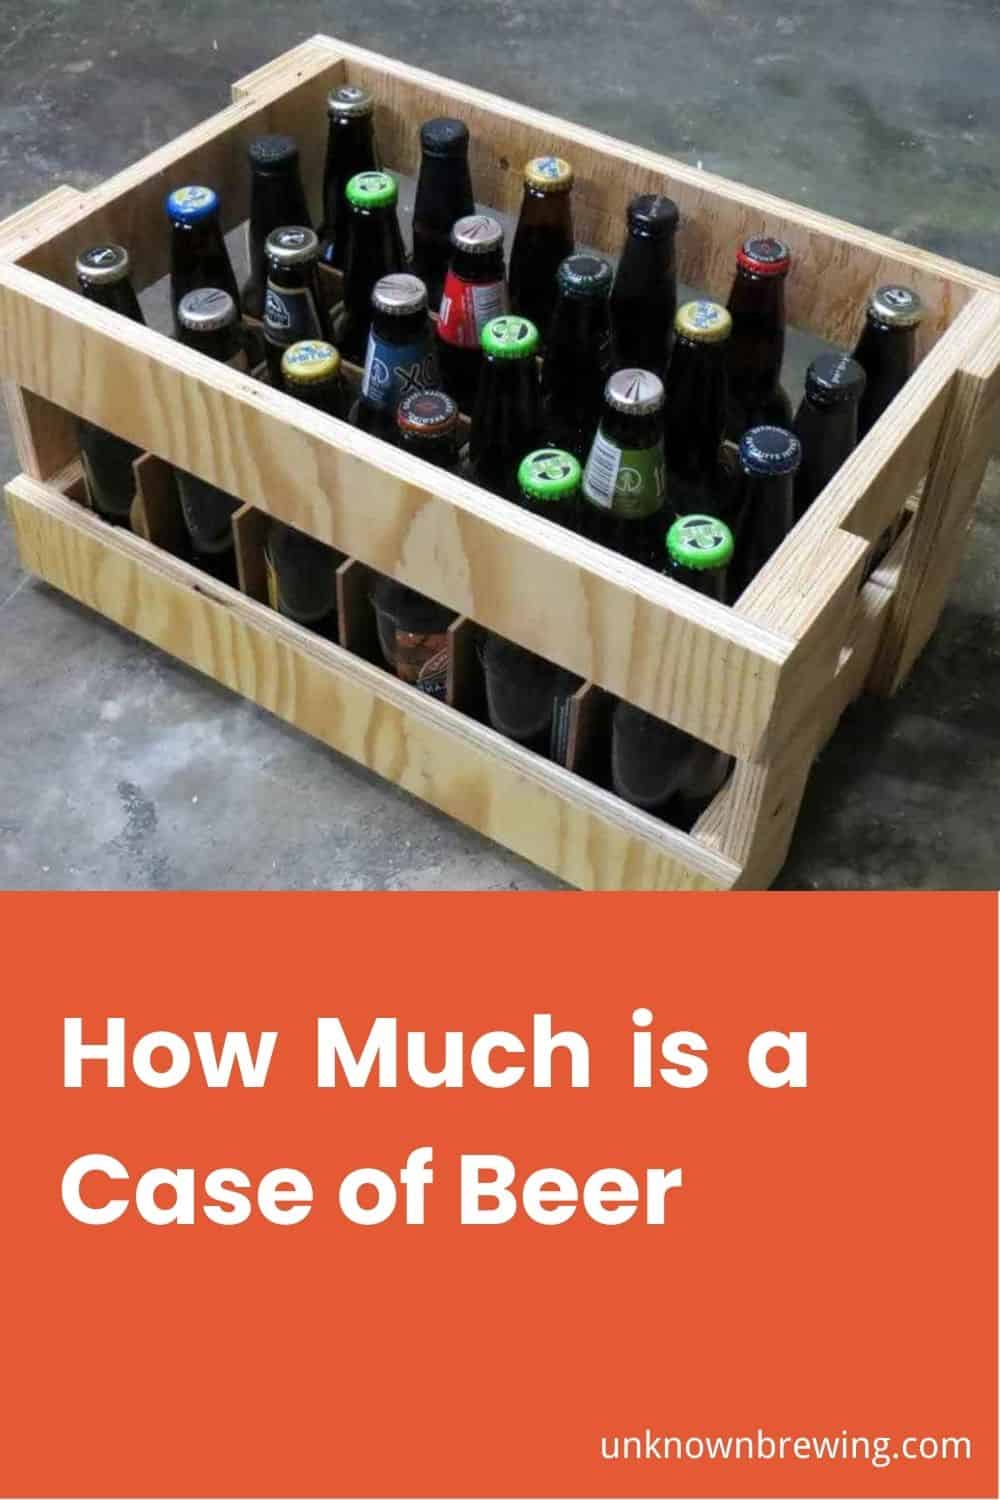 How Much is a Case of Beer